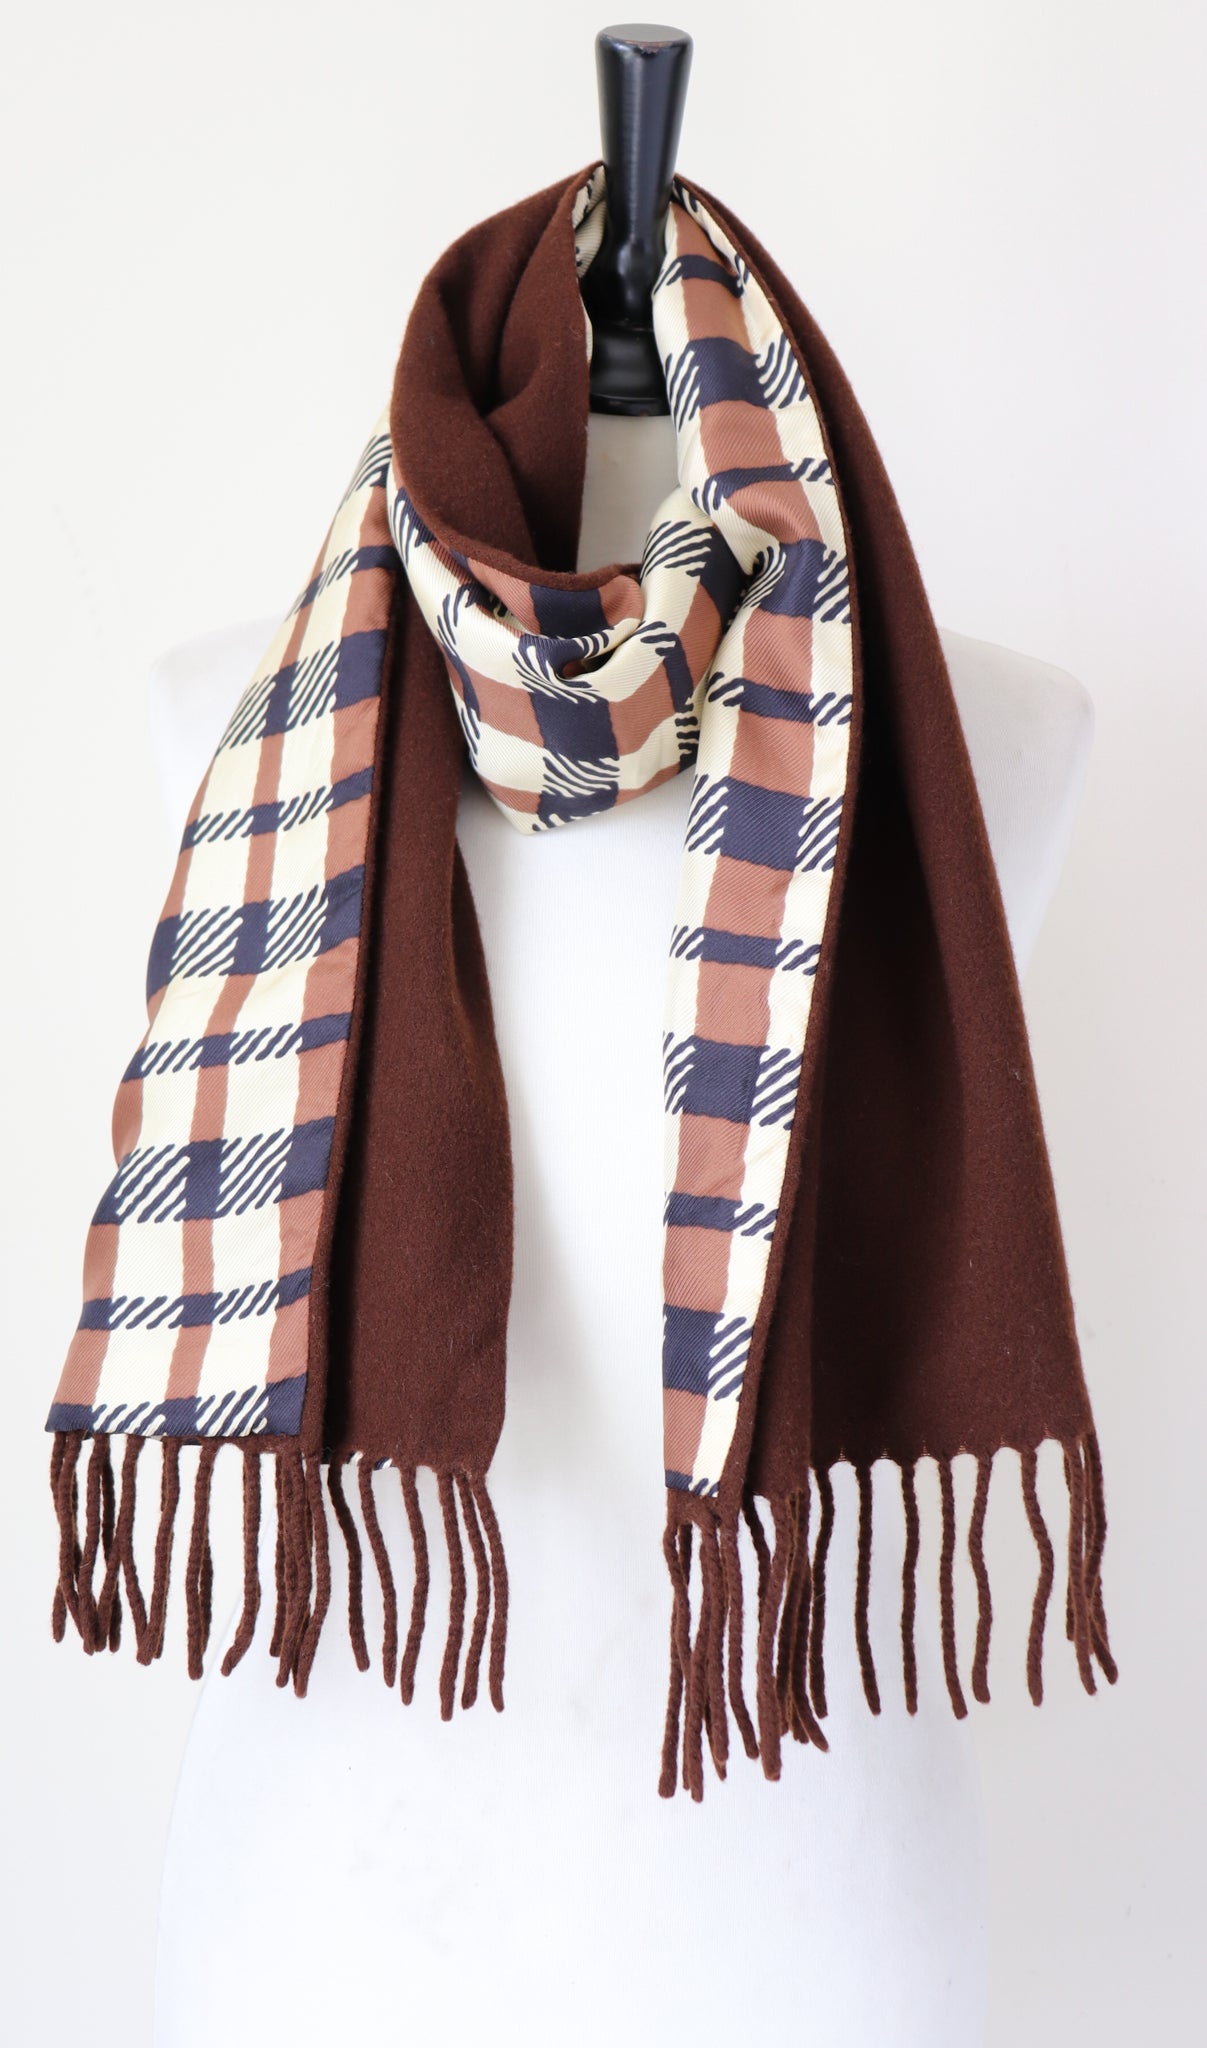 Mens Vintage Silk / Wool / Cashmere Scarf - Cream Brown Checked Print - LONG